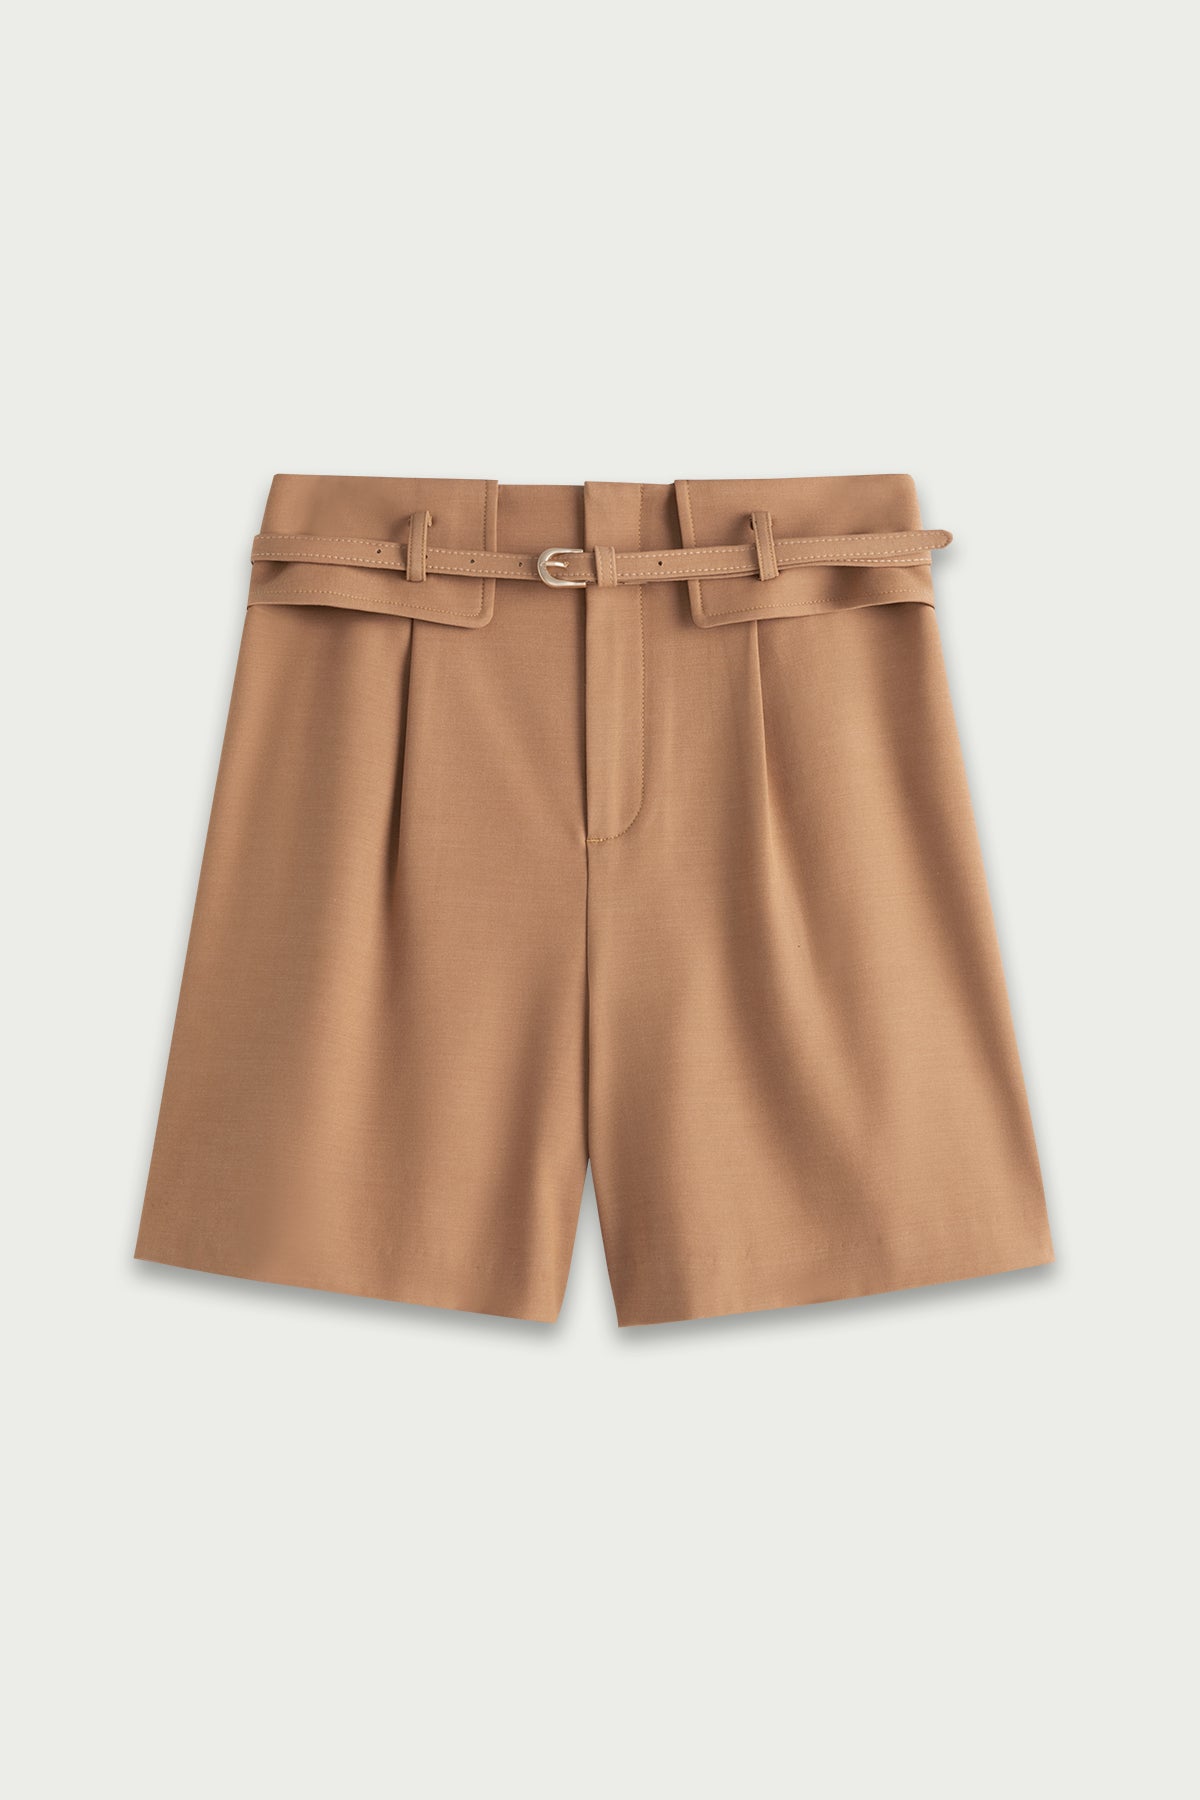 Fansilanen | Heather Brown Middy Shorts